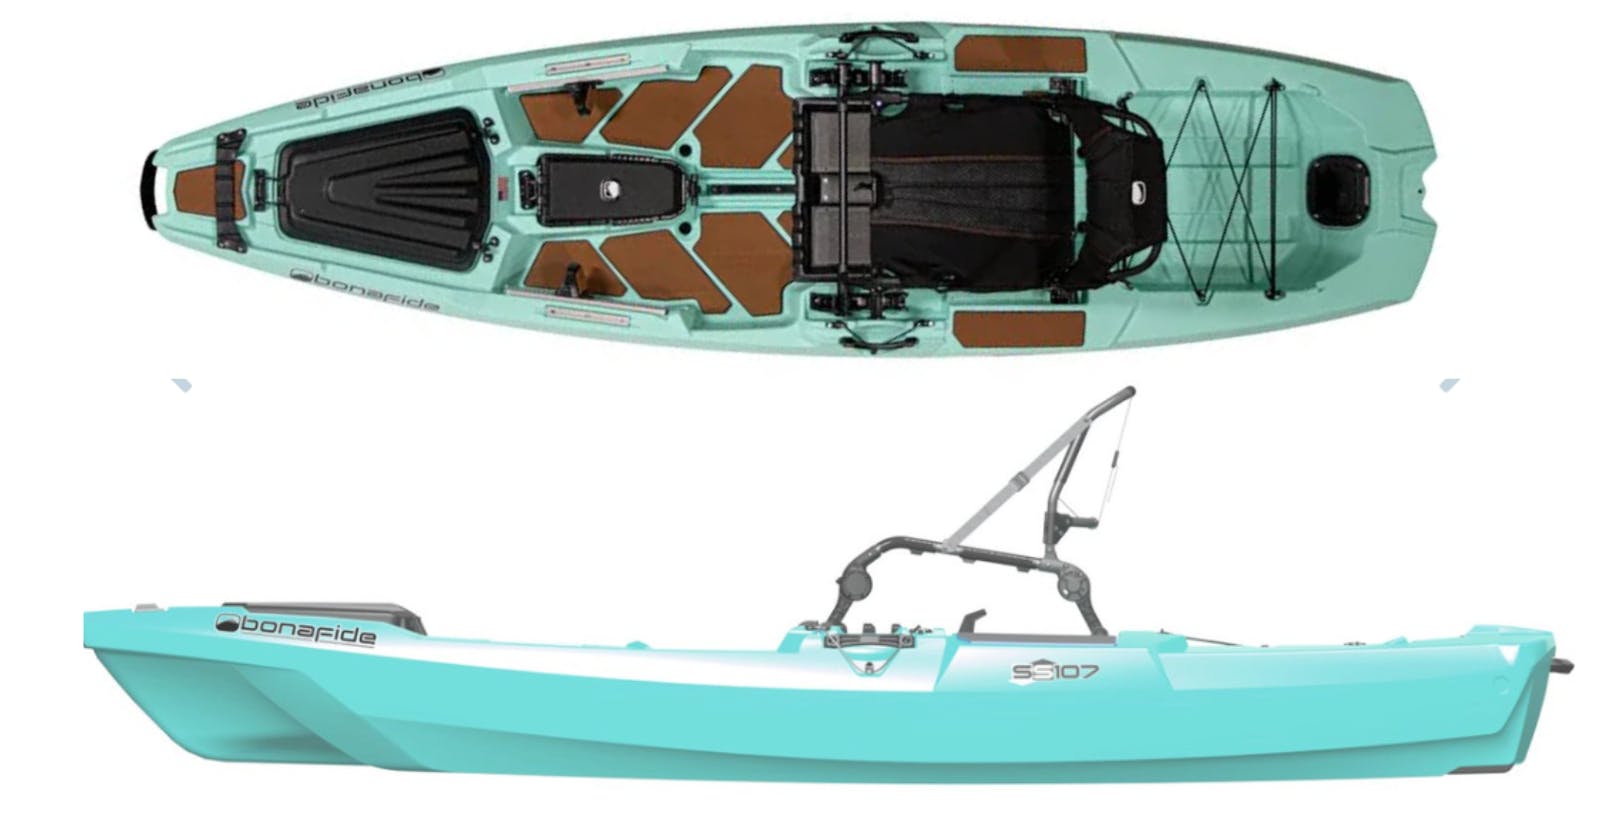 Two views of the Bonafide SS 107 Kayak. One is top down and one is the side view.